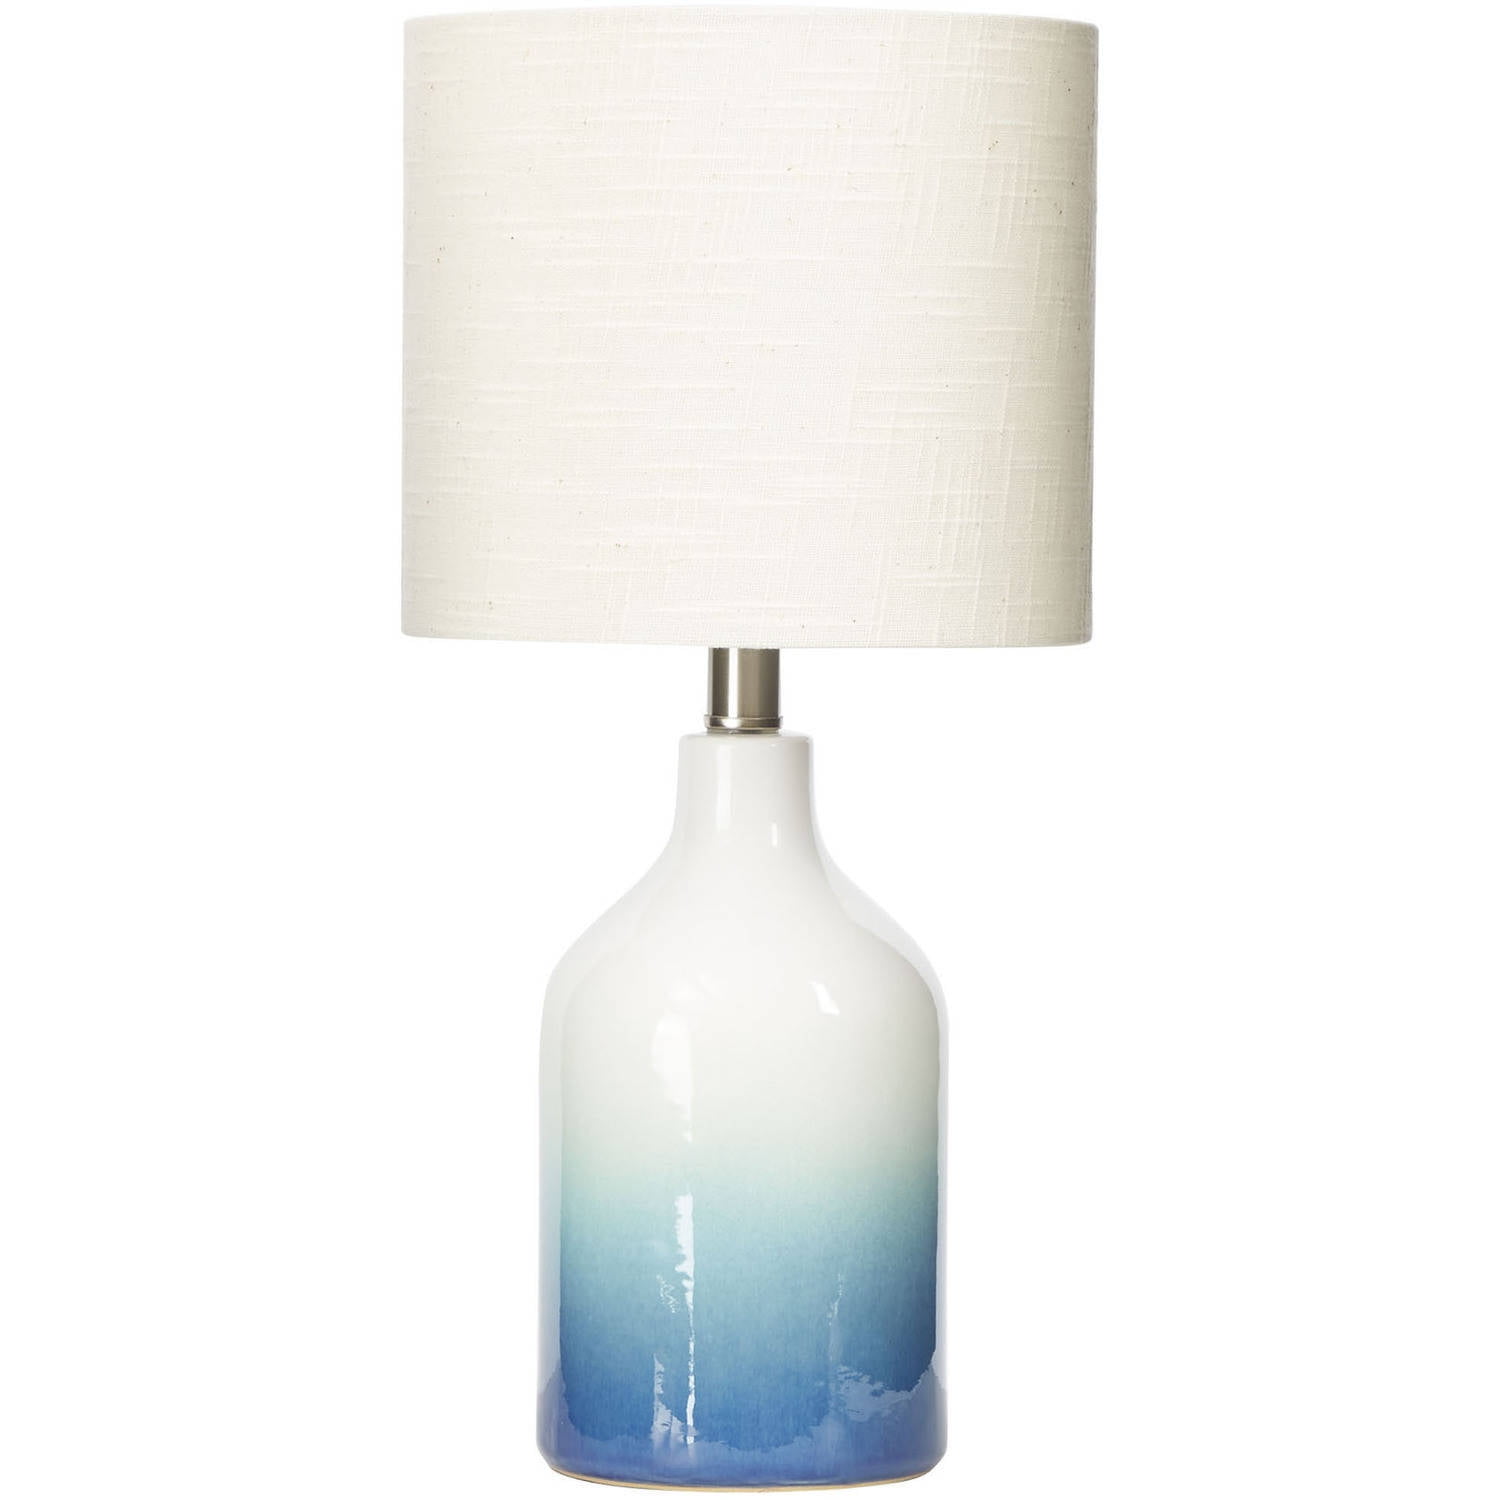 Gardens Ombre Ceramic Table Lamp Blue, Grey And Blue Detail Ceramic Table Lamp